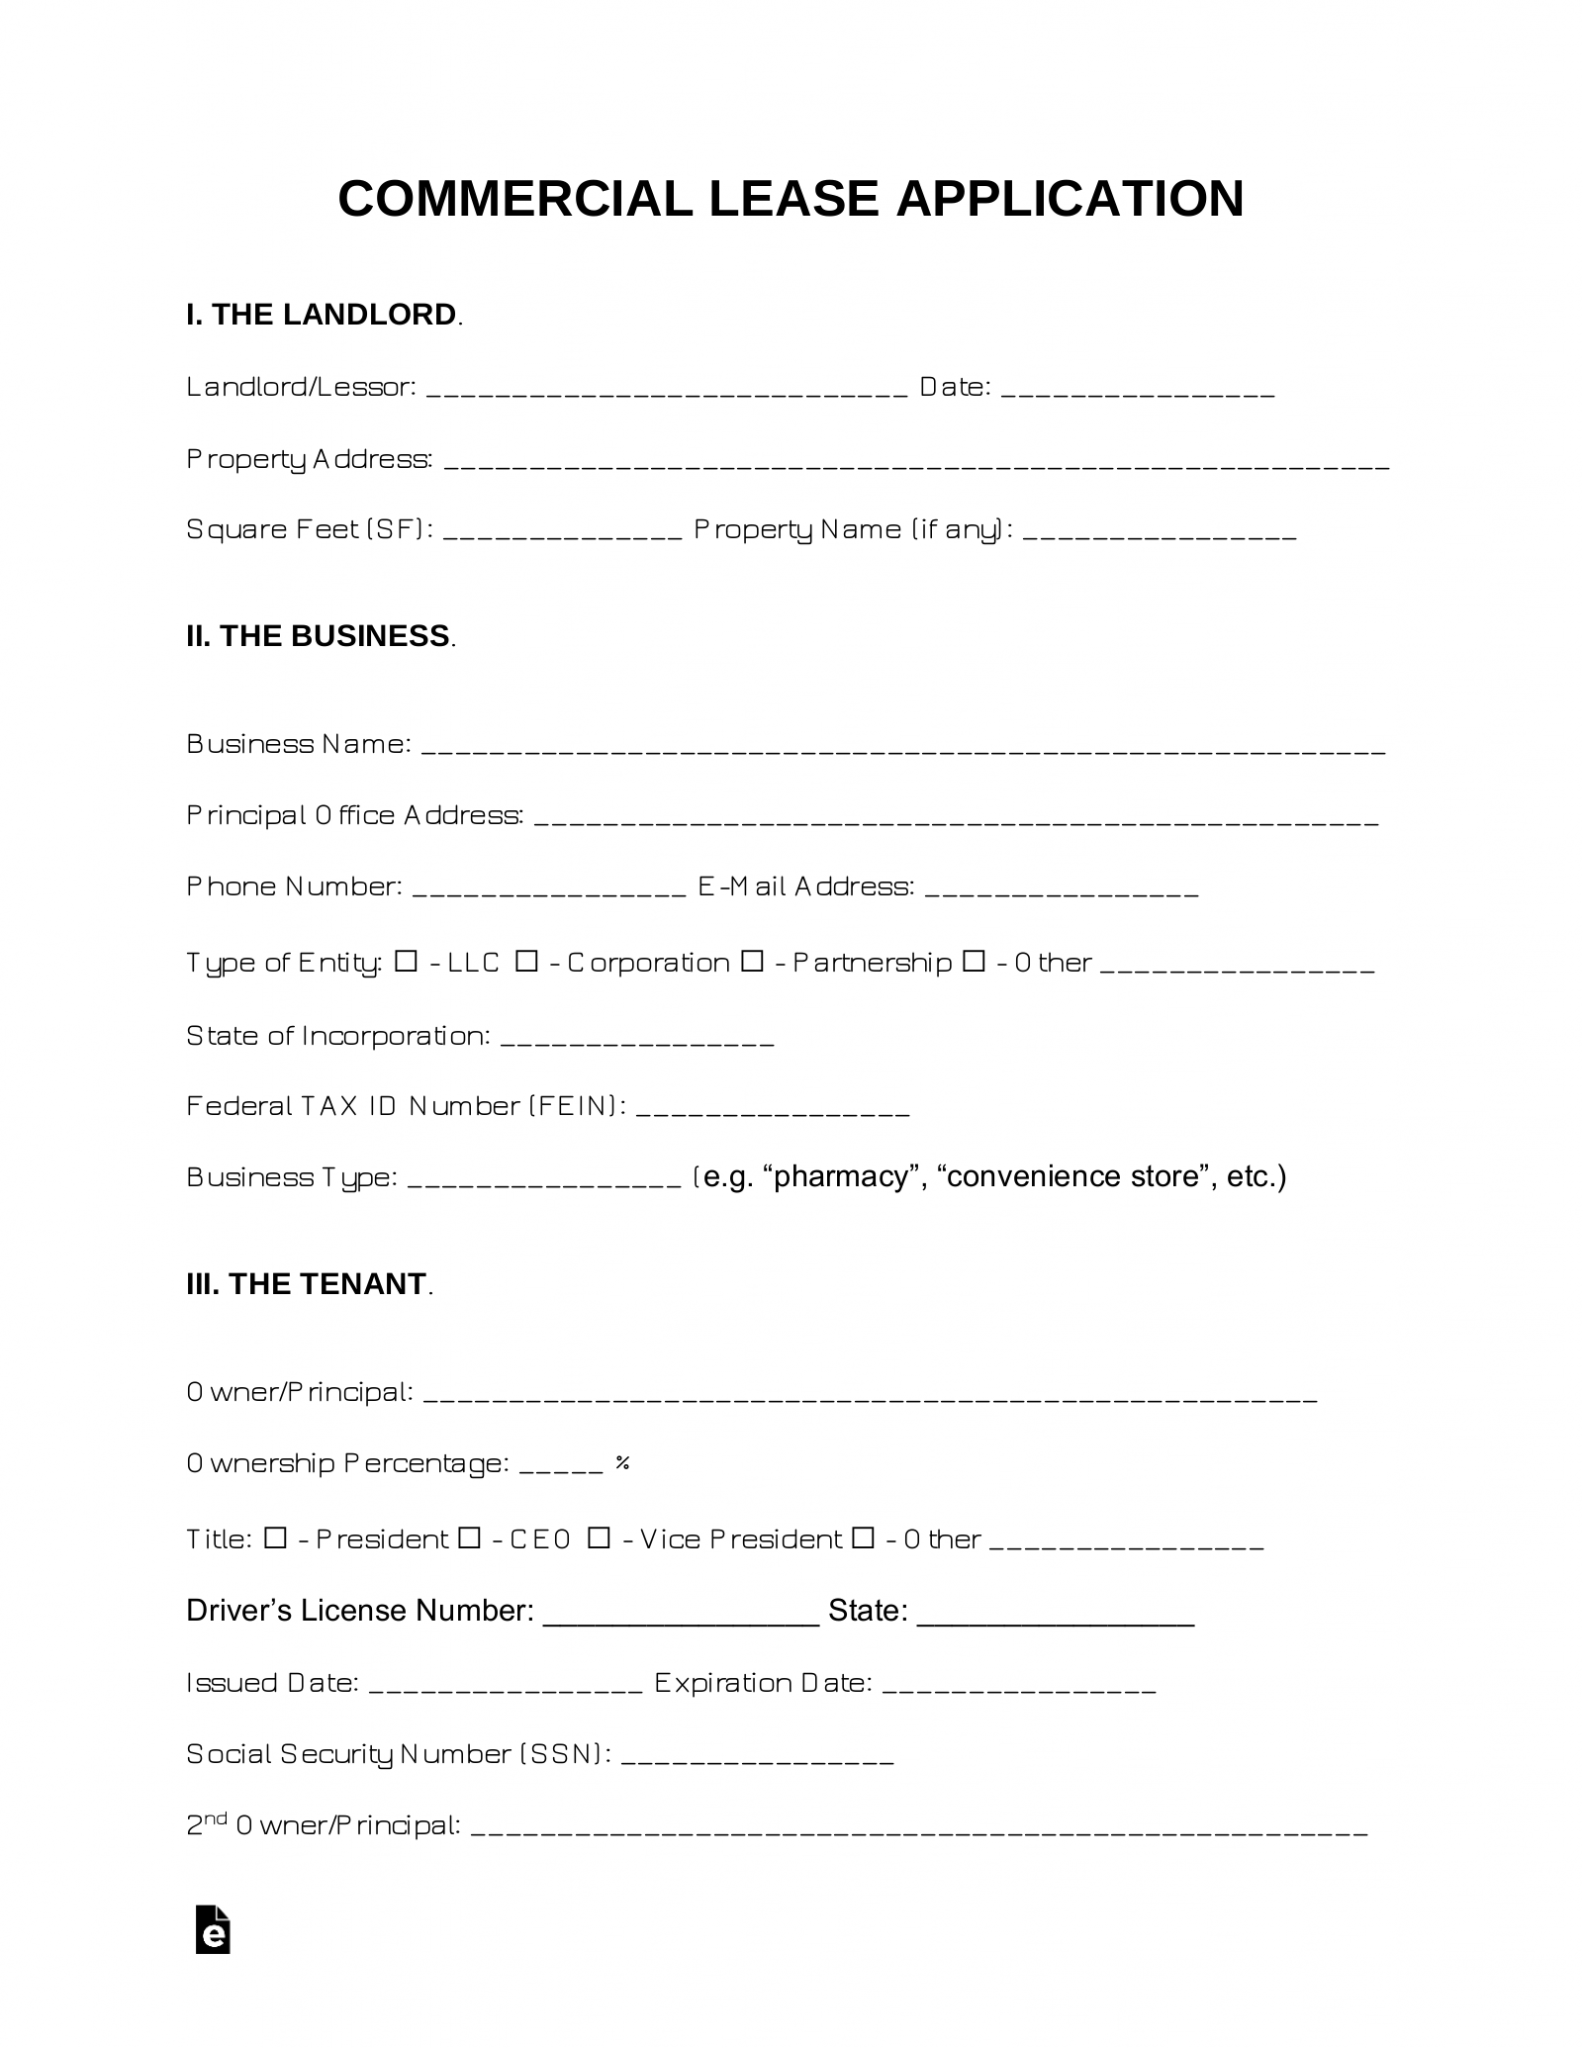 free-printable-commercial-lease-application